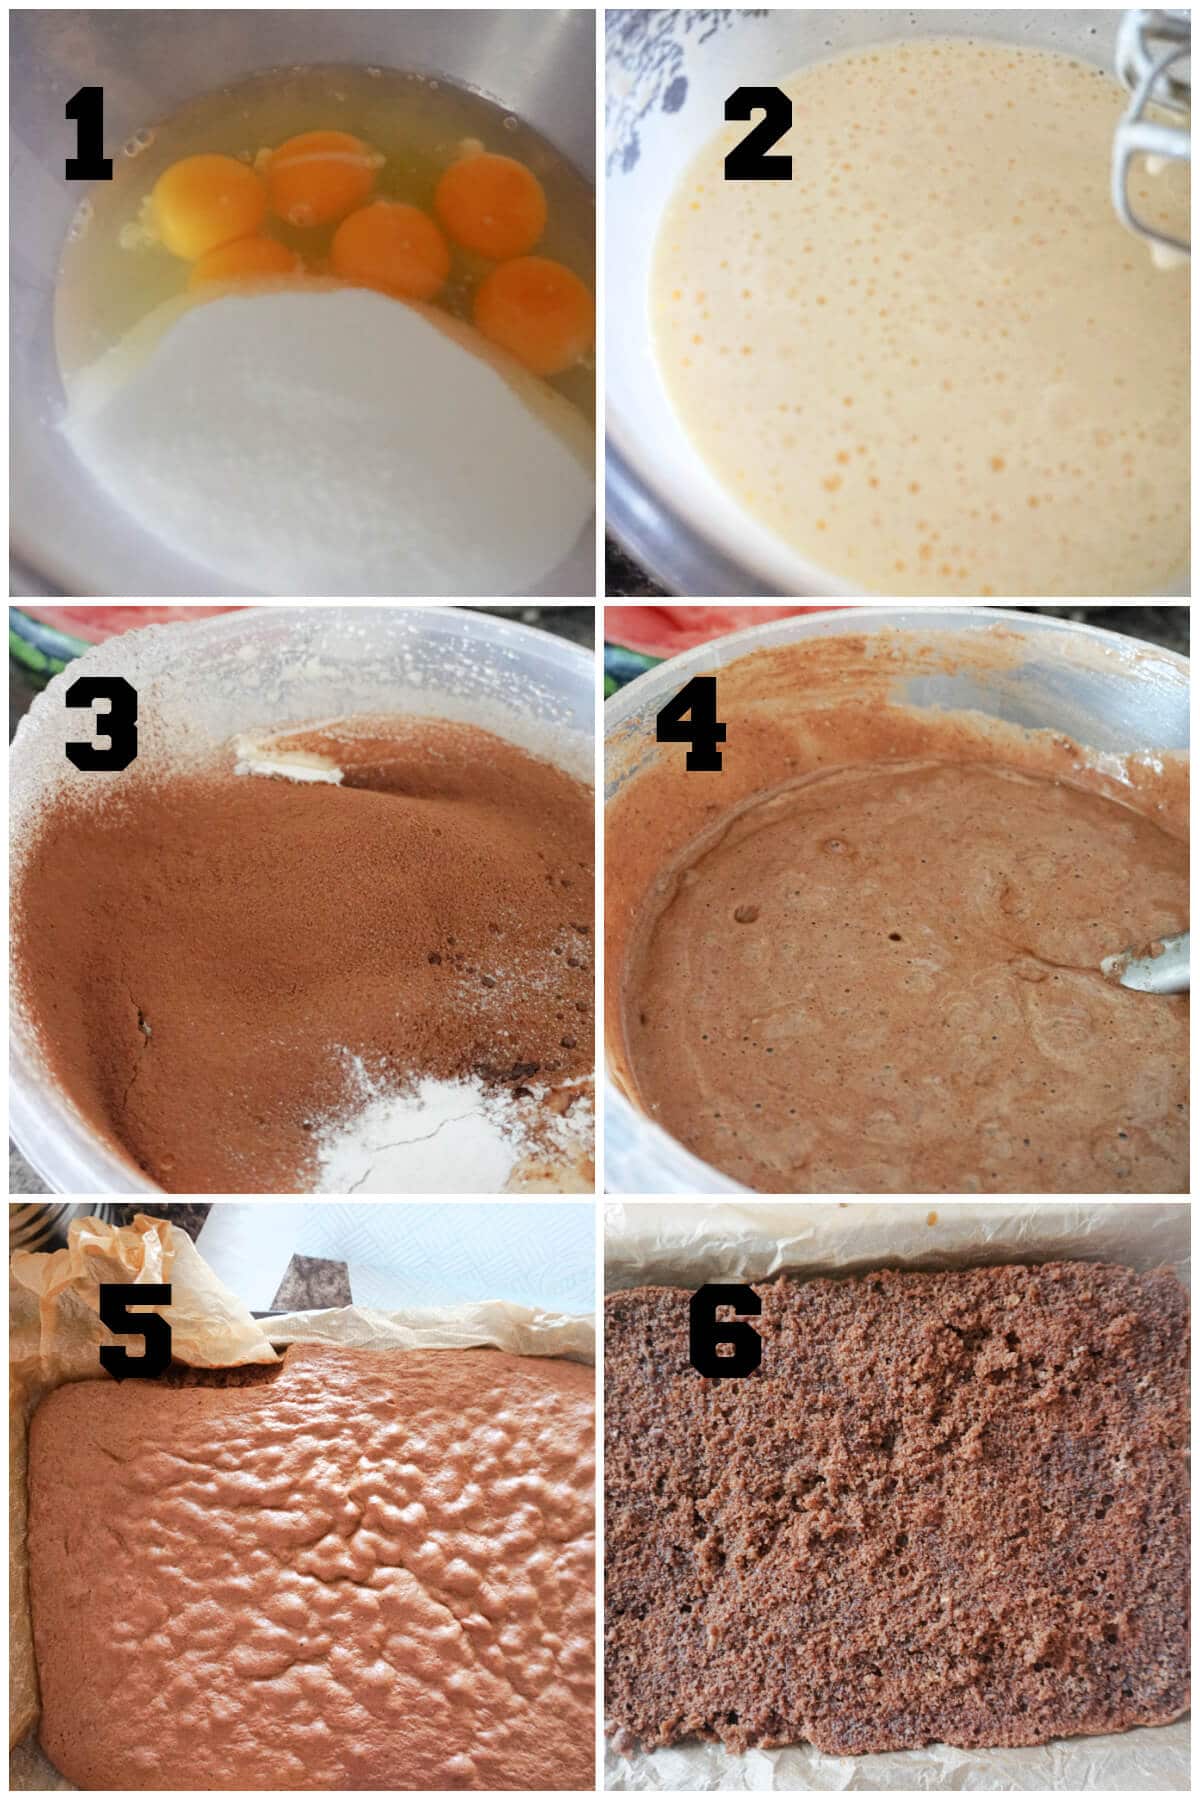 Collage of 6 photos to show how to make a chocolate sponge for cakes.